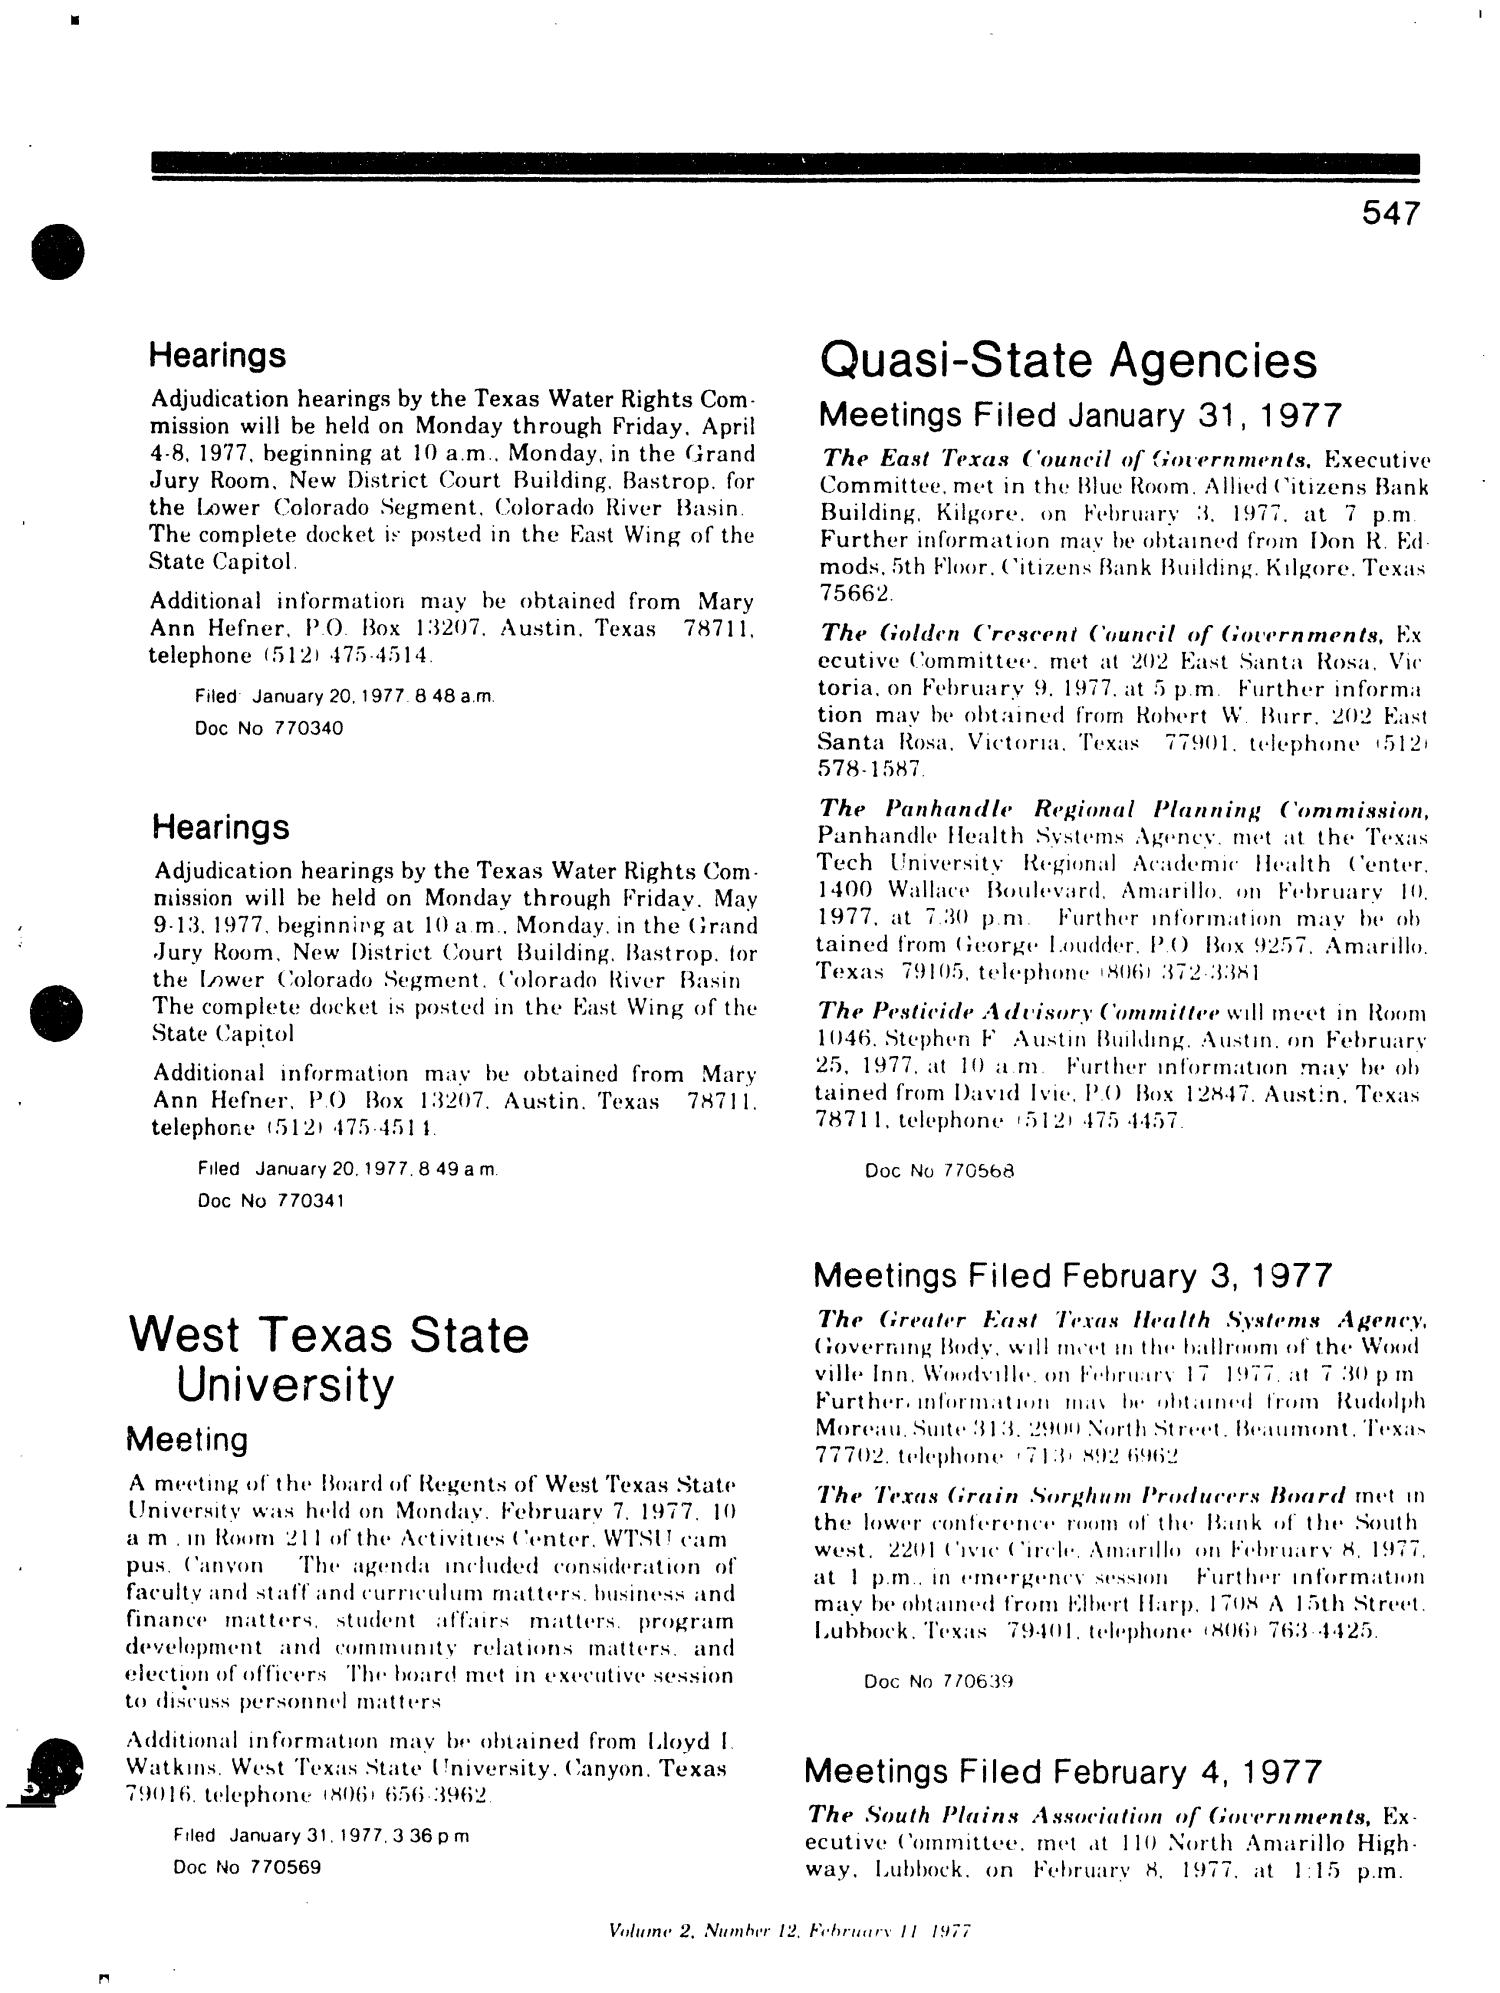 Texas Register, Volume 2, Number 12, Pages 507-562, February 11, 1977
                                                
                                                    547
                                                